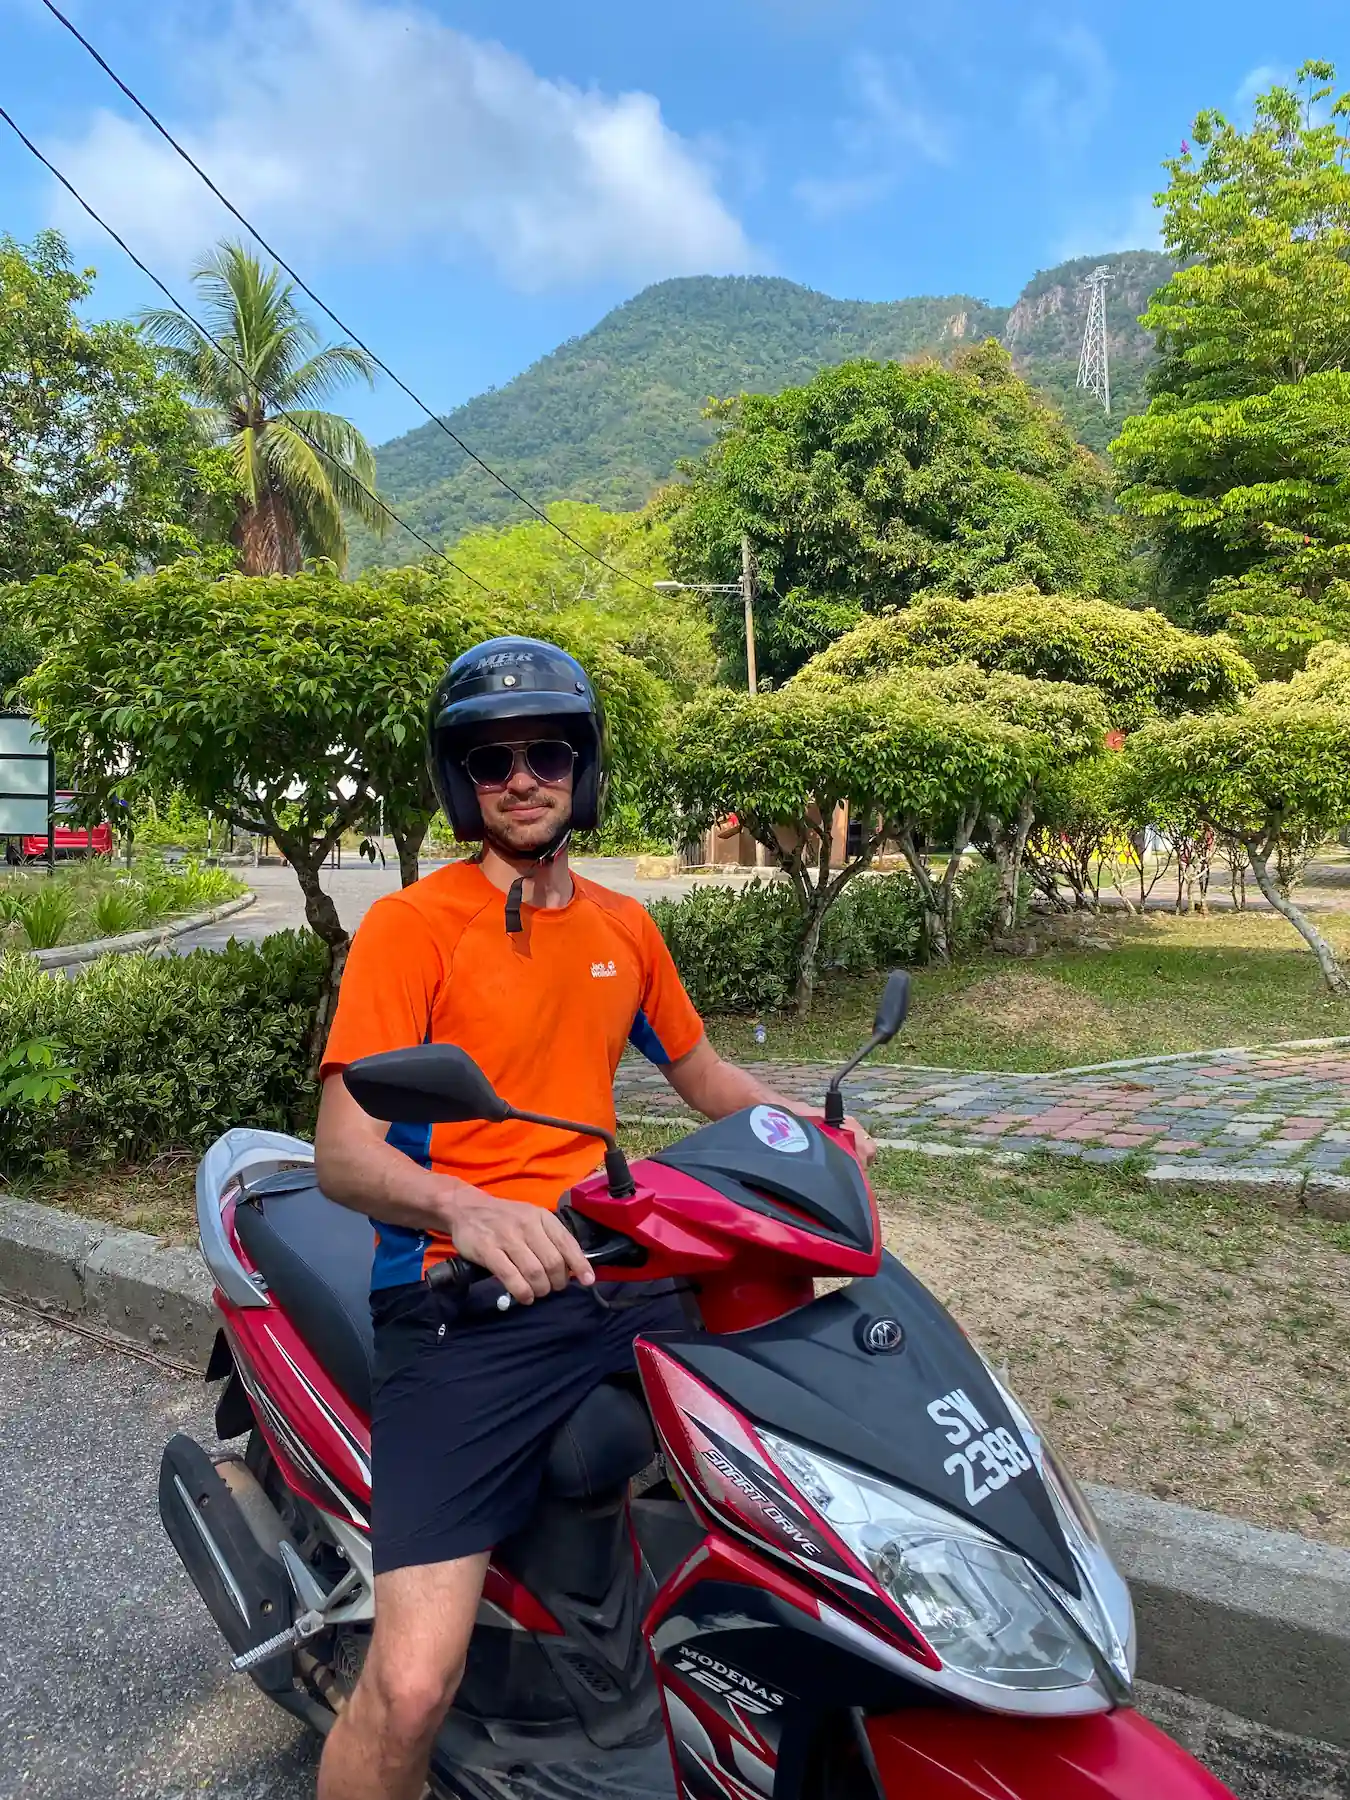 Man in orange shirt sitting on red moped with tropical mountain landscape in background